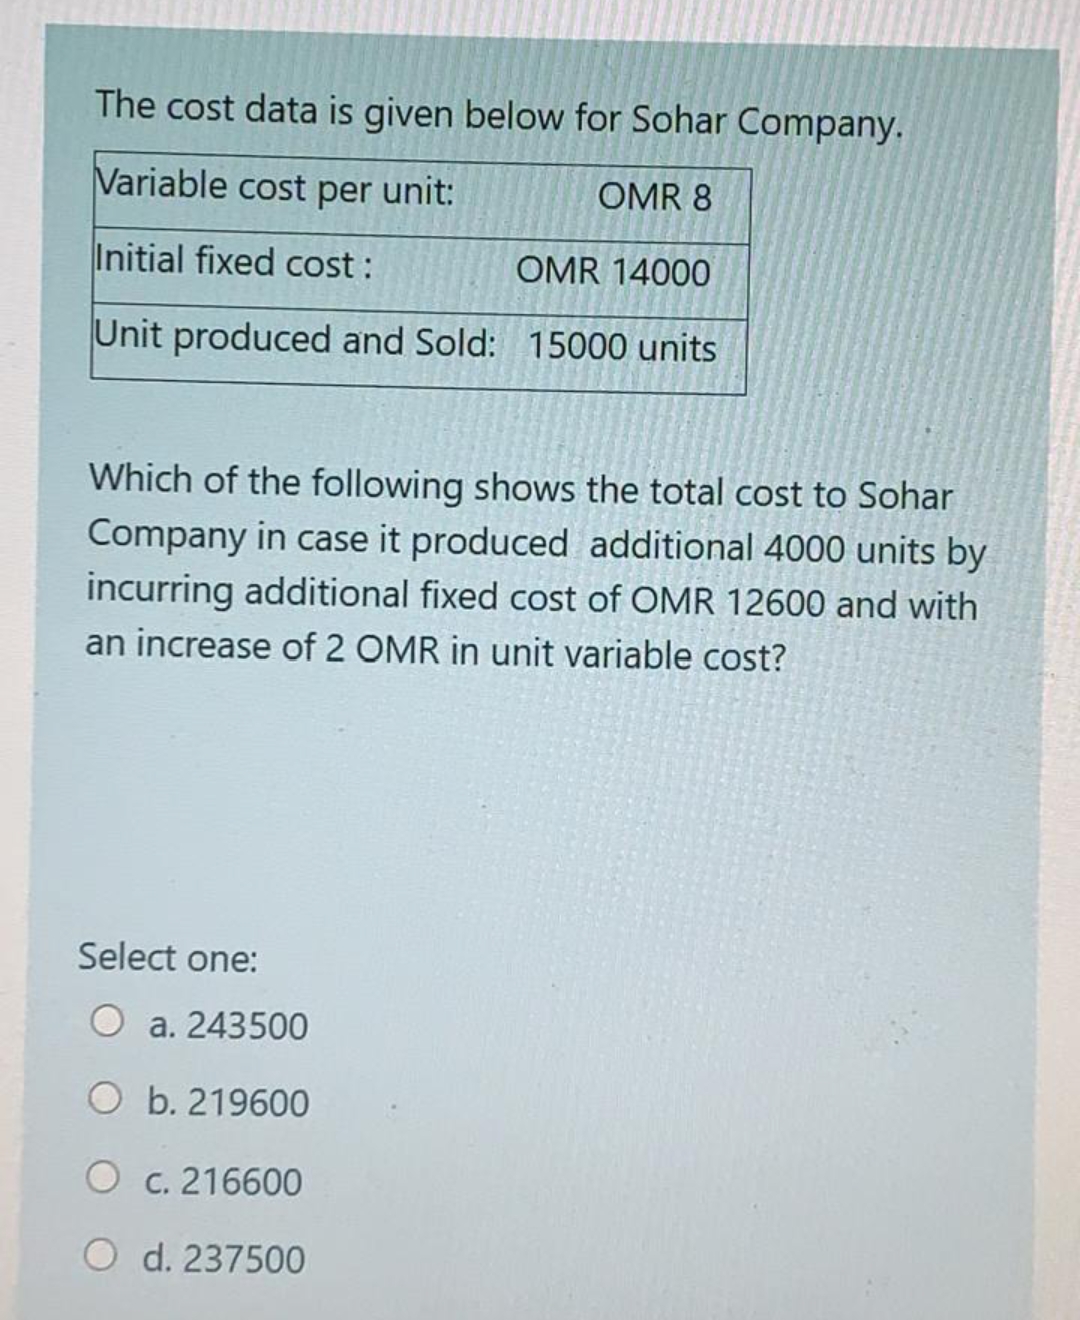 The cost data is given below for Sohar Company.
Variable cost per unit:
OMR 8
Initial fixed cost :
OMR 14000
Unit produced and Sold: 15000 units
Which of the following shows the total cost to Sohar
Company in case it produced additional 4000 units by
incurring additional fixed cost of OMR 12600 and with
an increase of 2 OMR in unit variable cost?
Select one:
O a. 243500
O b. 219600
O c. 216600
O d. 237500
